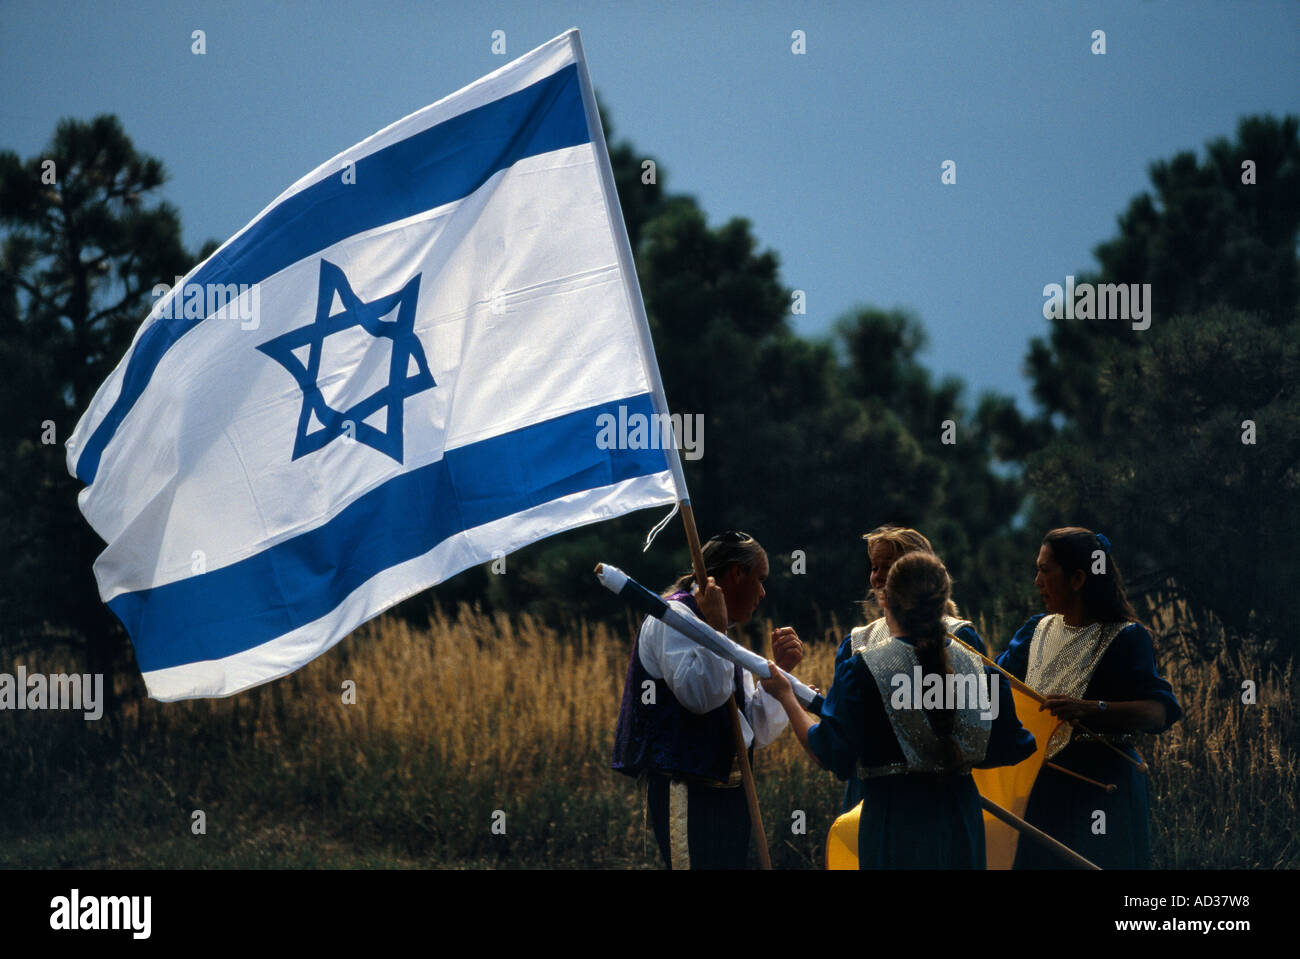 Group wearing costumes carries the flag of Israel in a mountain field. Stock Photo